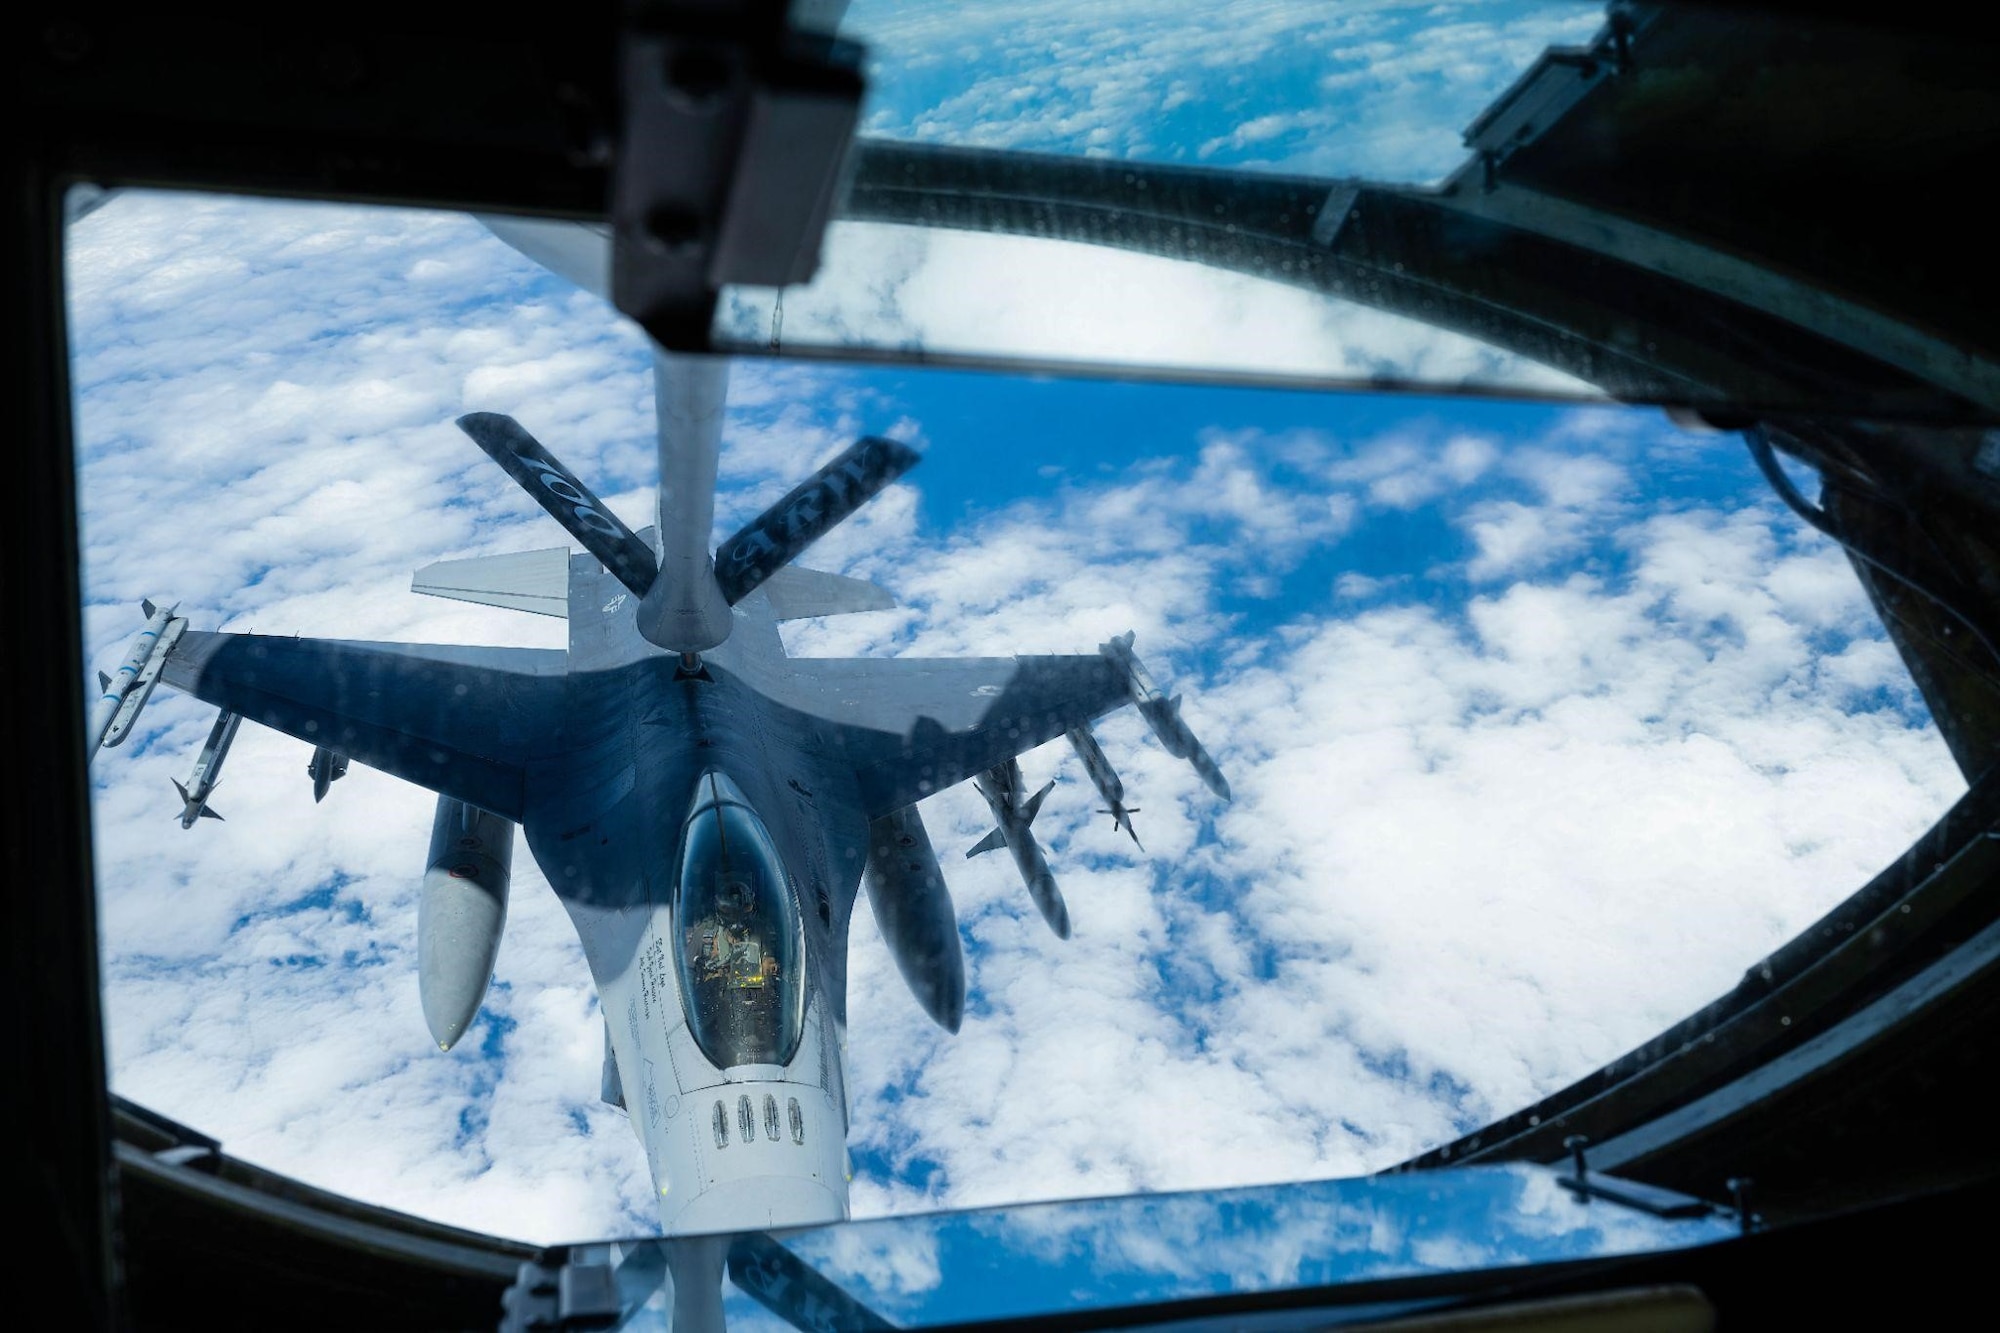 A U.S. Air Force F-16 Fighting Falcon aircraft assigned to the 480th Fighter Squadron, Spangdahlem Air Base, Germany, refuels from the boom pole of a KC-135 Stratotanker aircraft from the 100th Air Refueling Wing, Royal Air Force Mildenhall, England, during Real Thaw 22, June 29, 2022. Real Thaw 22 is an annual multi-national training exercise held by the Portuguese air force who invited the participating nations to attend. (U.S. Air Force photo by Senior Airman Nicholas Swift)